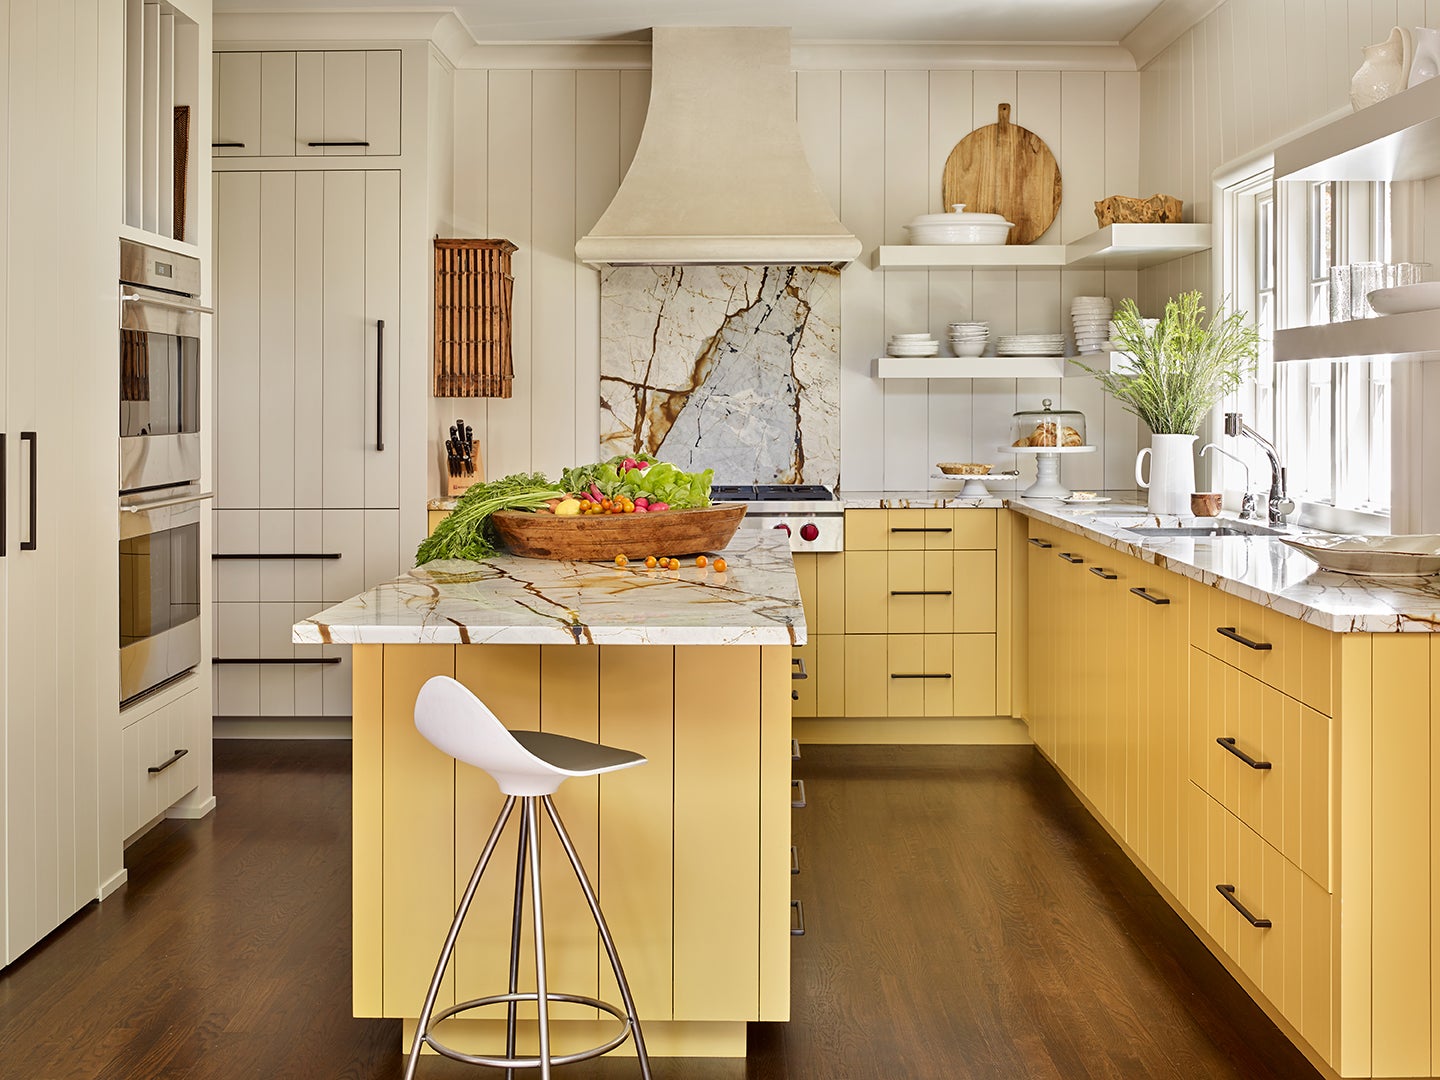 Yellow kitchen with open shelving